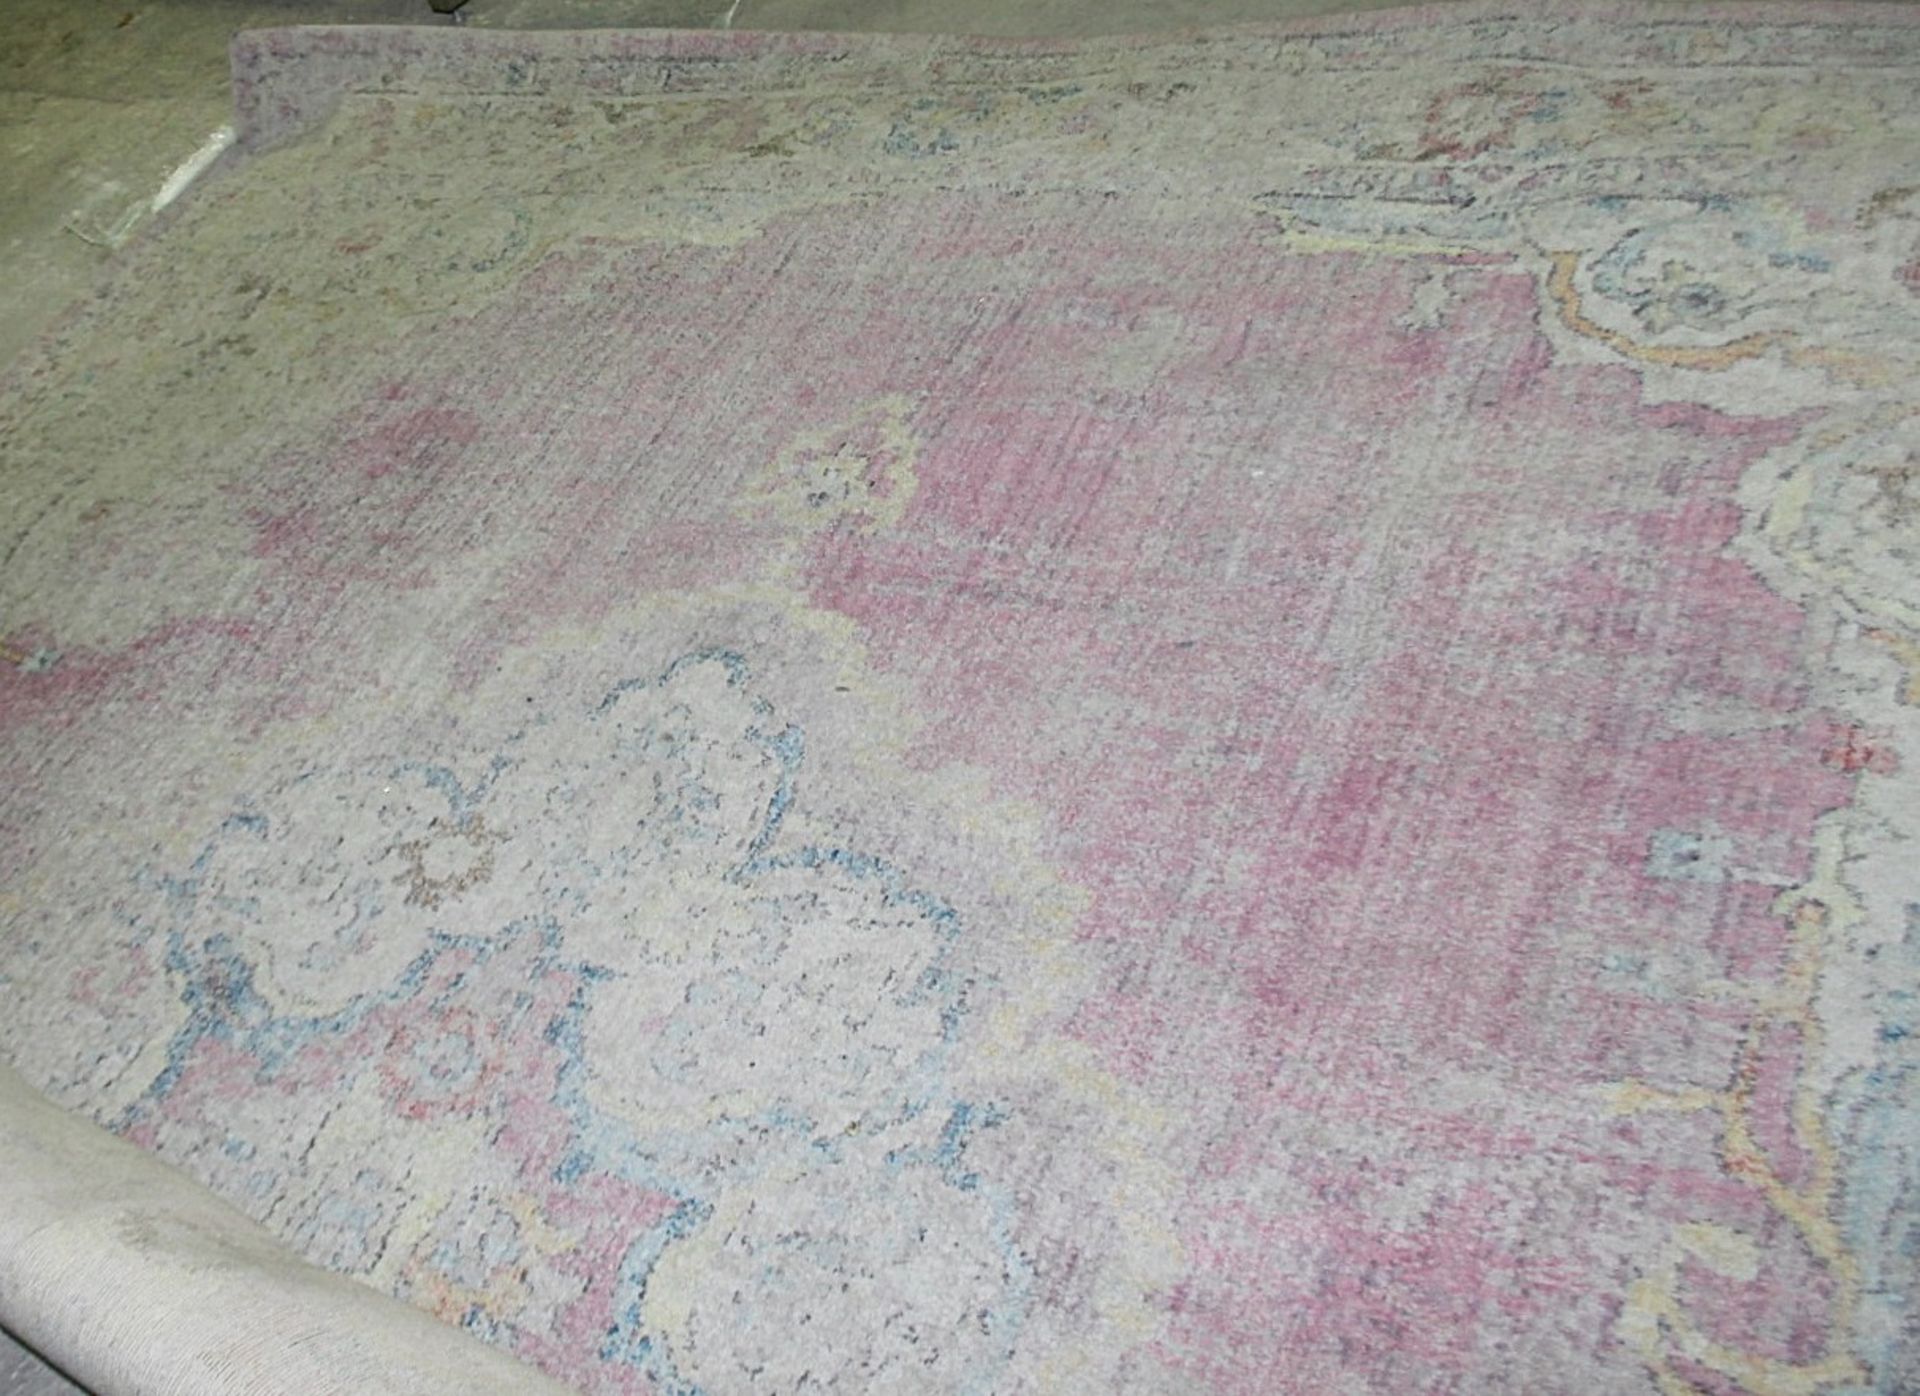 1 x Large Rug Featuring An Distressed Classical-Style Design In Pink - Ex-Showroom Piece -